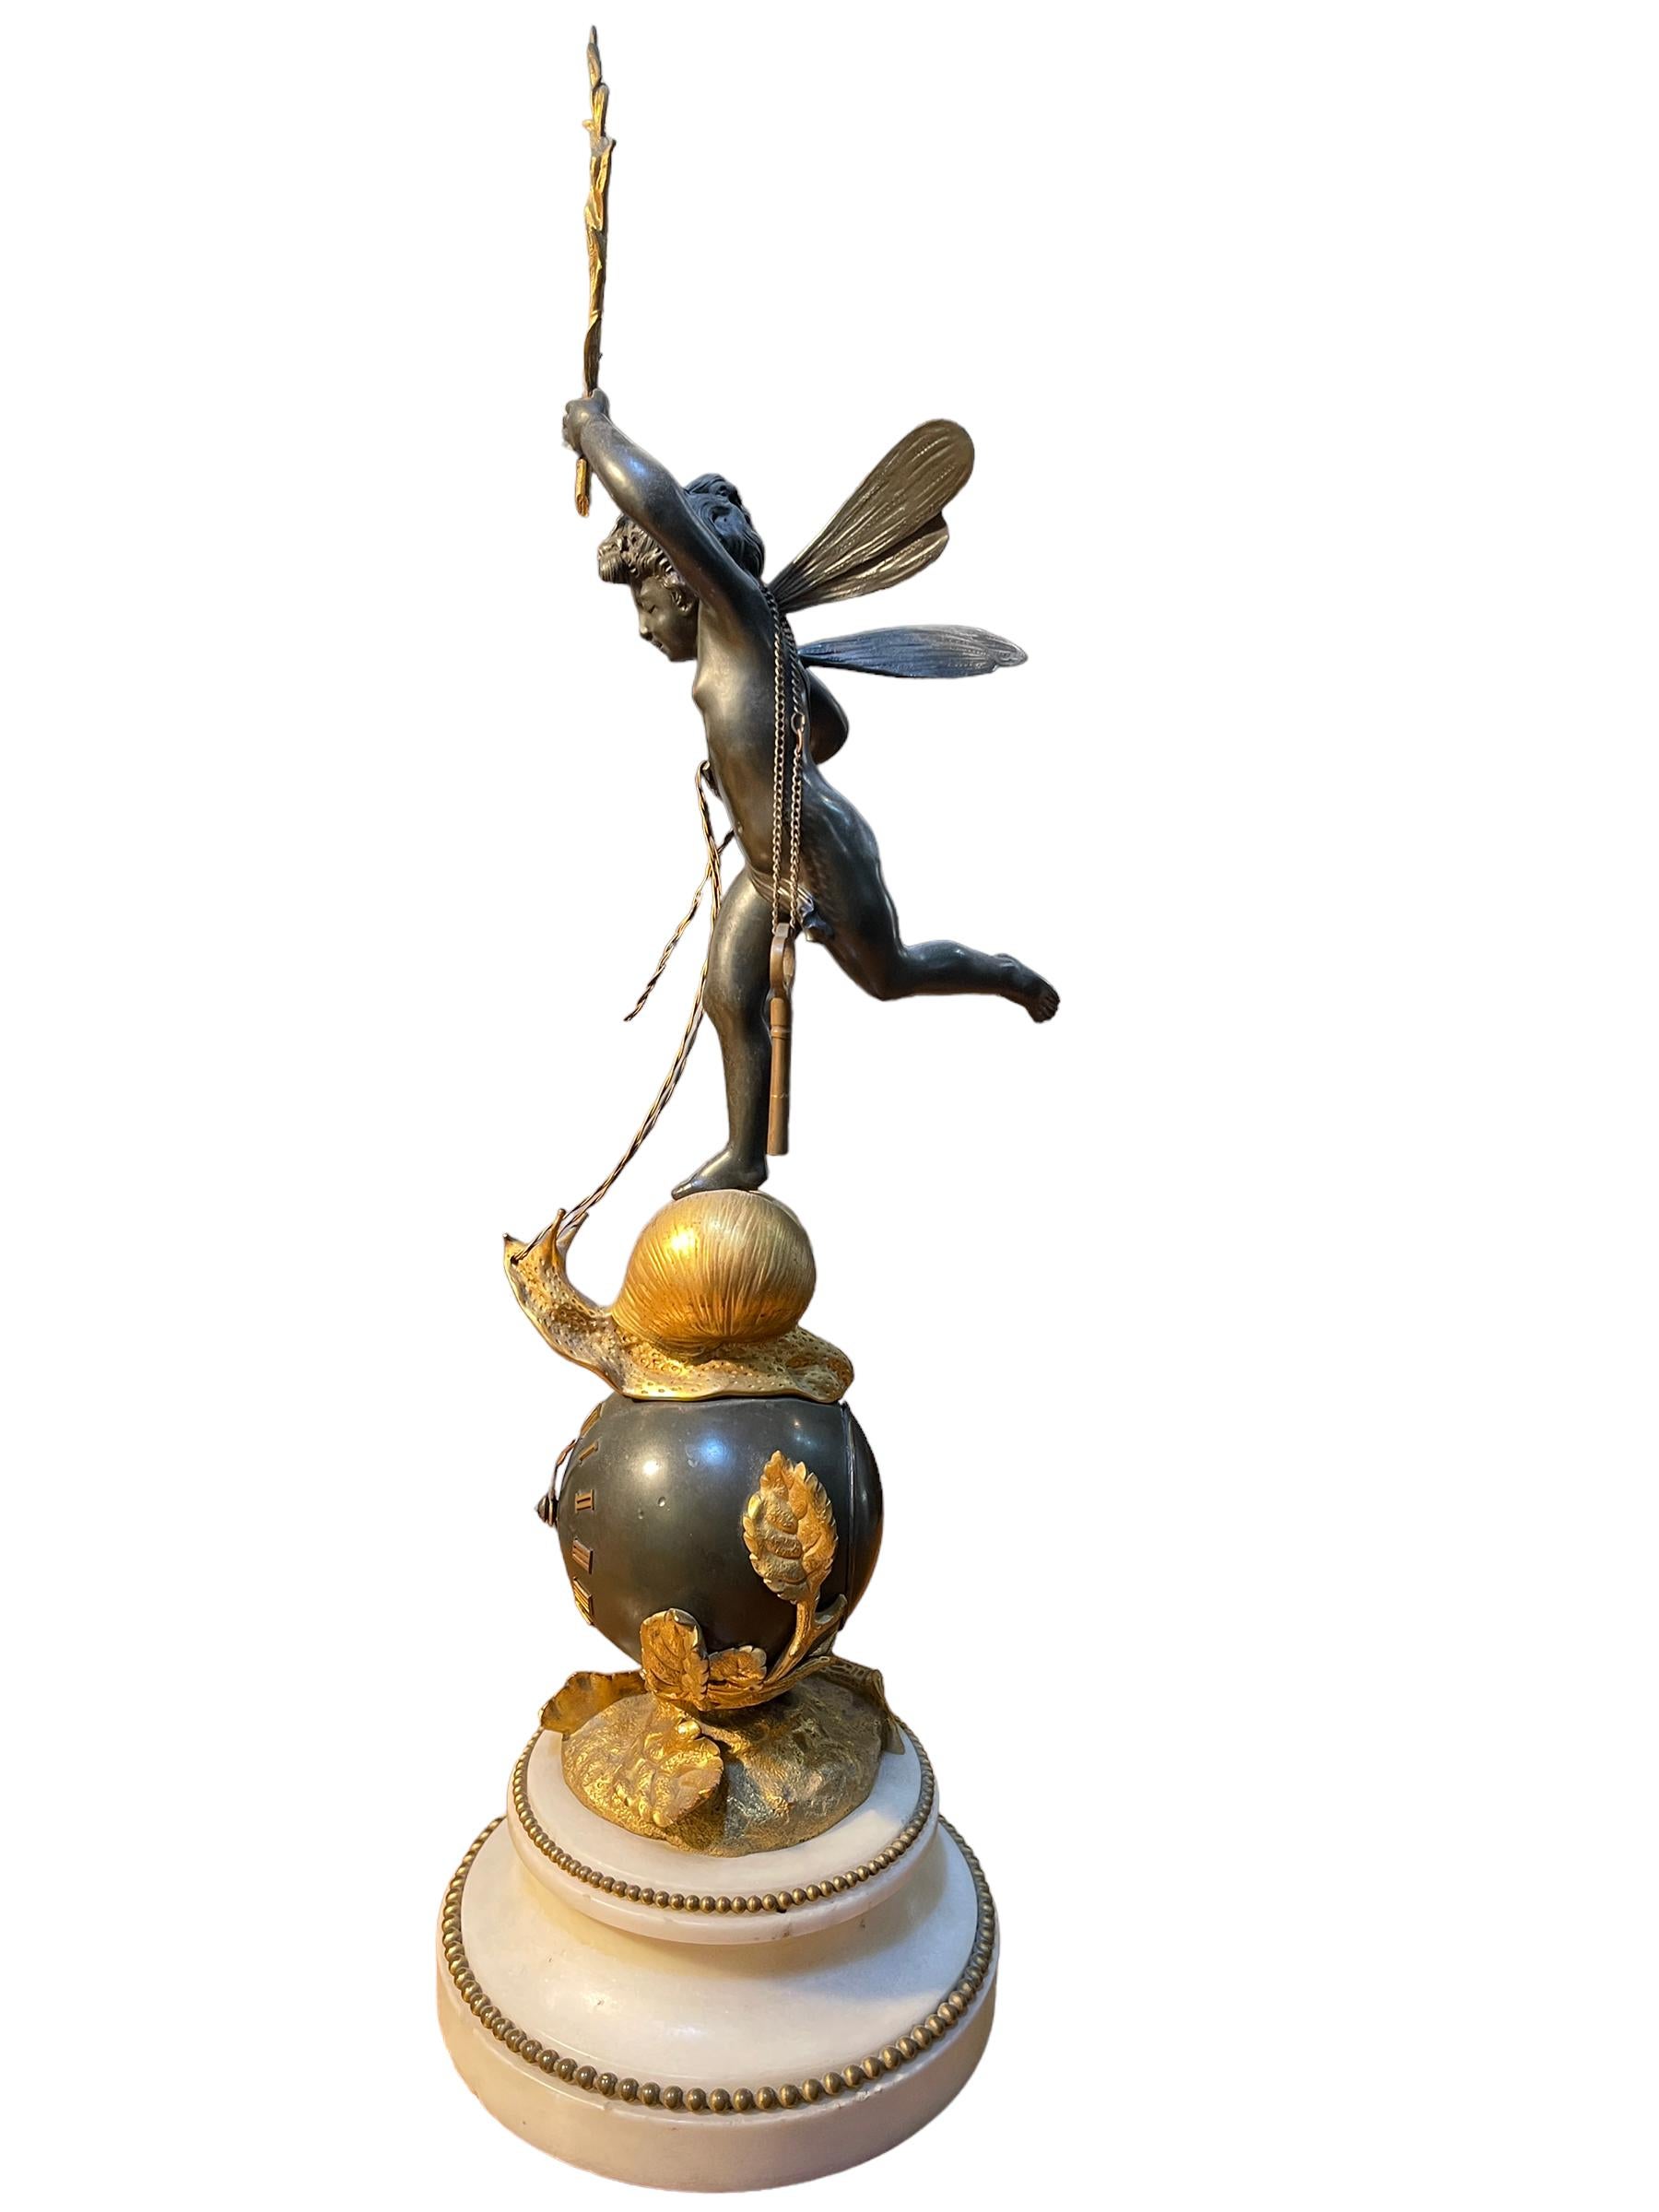 Bronze statue clock, 19th century
Gilt bronze clock, late 1800s, with putto riding a snail.
In good condition, as shown in the photos, mechanical part to be overhauled.
Dimensions: diameter 15cm, height 48cm.